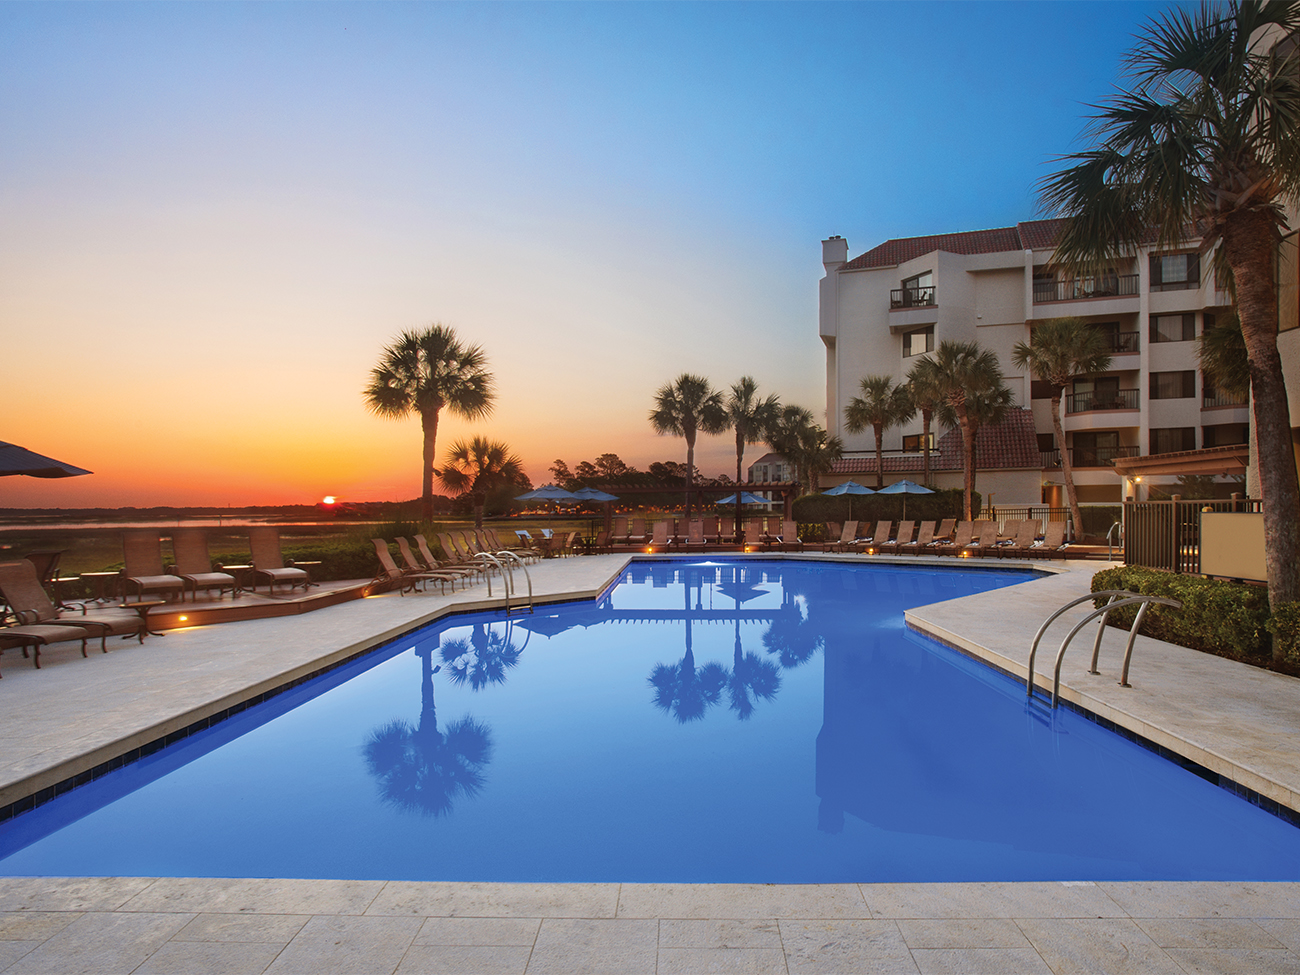 Marriott's Harbour Point Main Pool Sunset. Marriott's Harbour Point is located in Hilton Head Island, South Carolina United States.